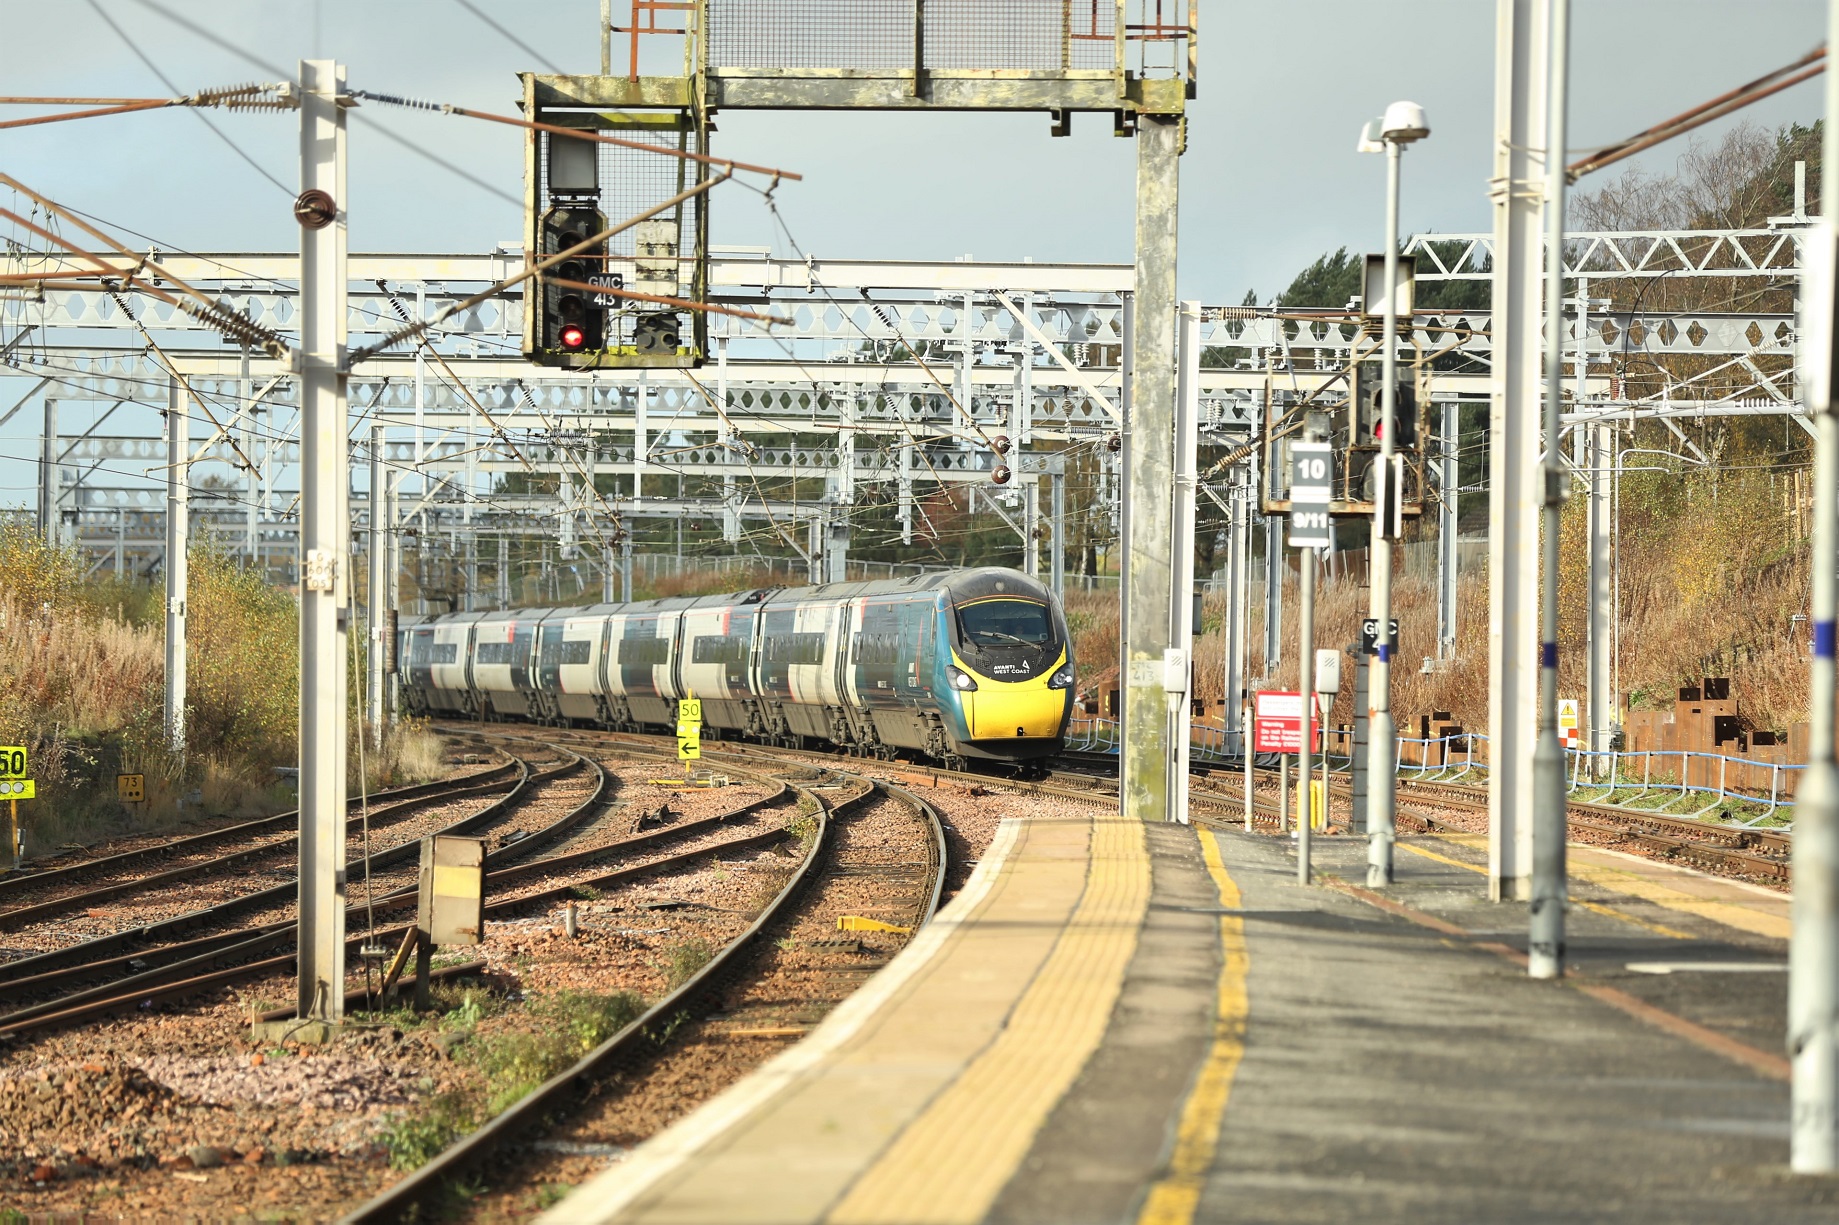 Overhead electrification structures installed at Carstairs junction upgrade